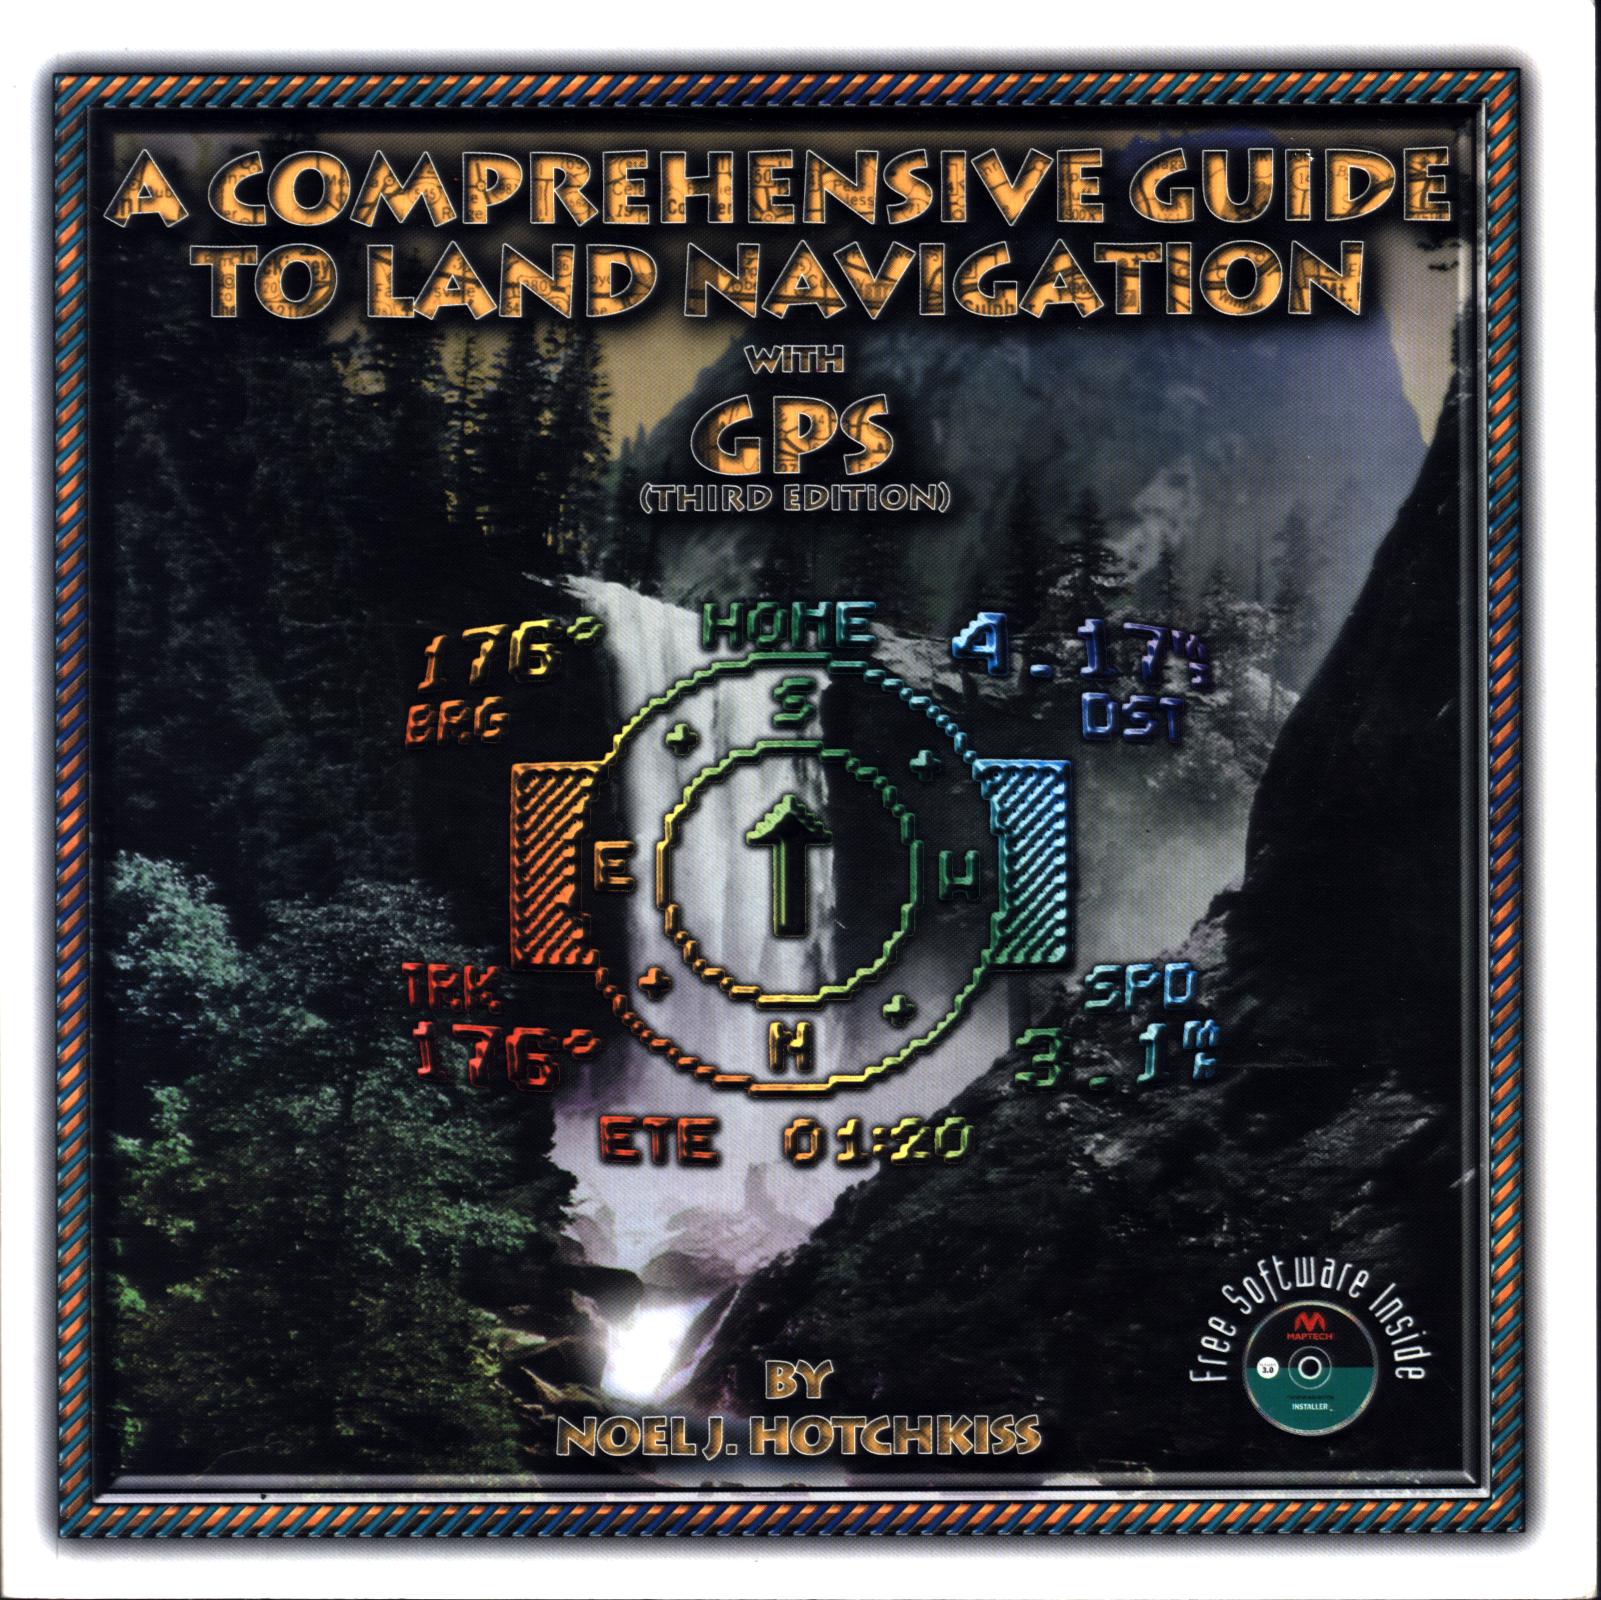 A COMPREHENSIVE GUIDE TO LAND NAVIGATION with GPS. 